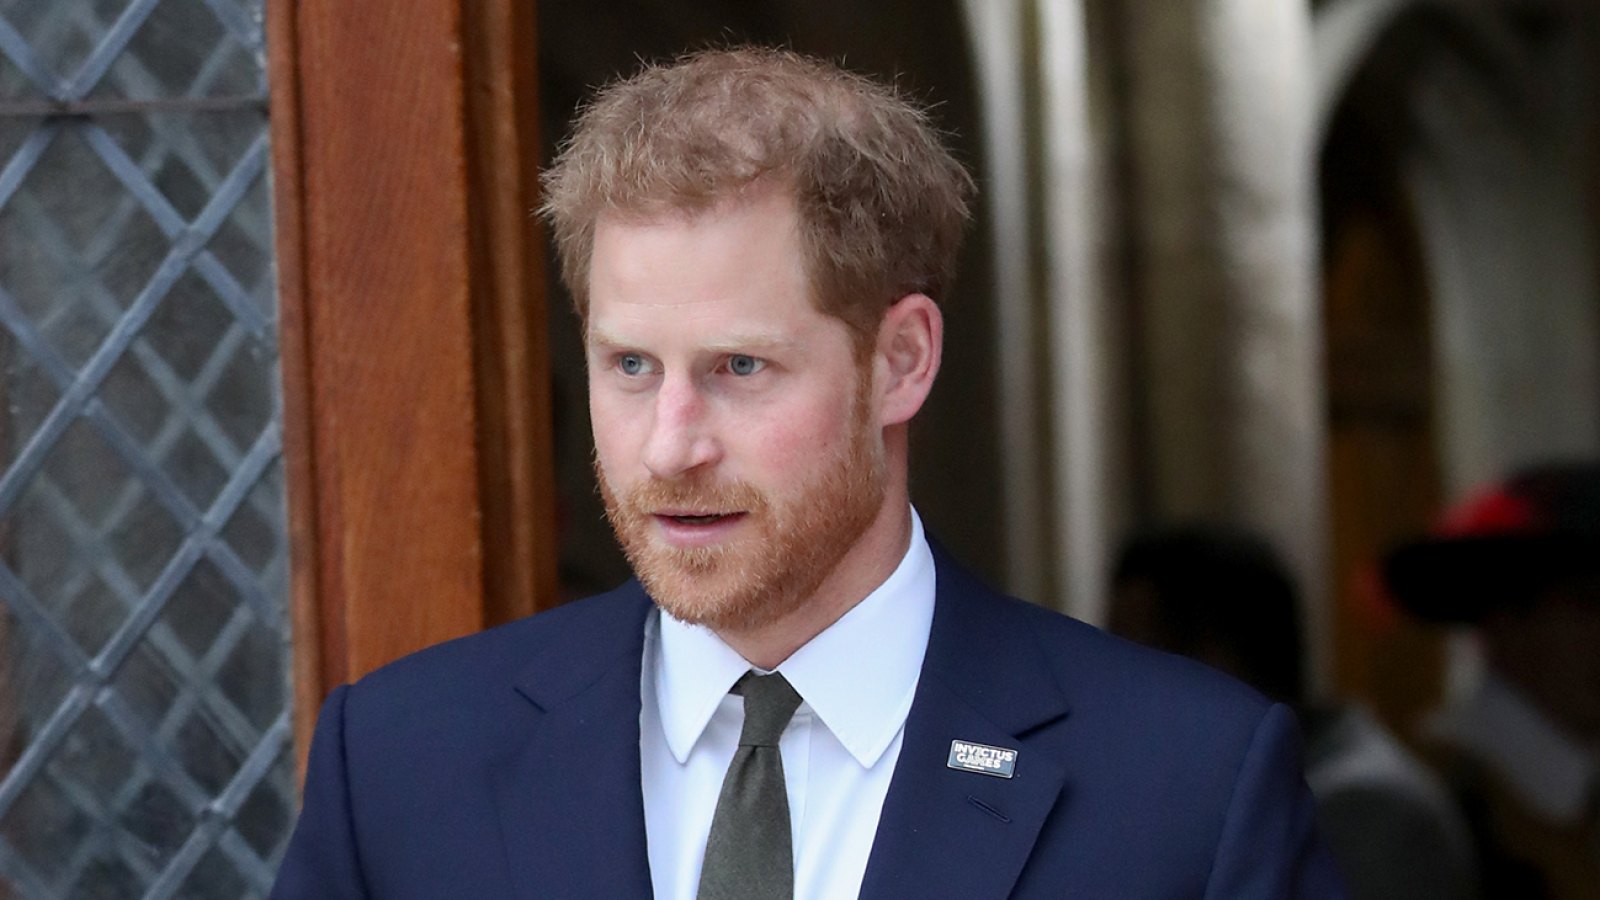 Prince Harry Wants to Stop ‘The Crown’ Once It Gets to His Life, Royal Biographer Claims